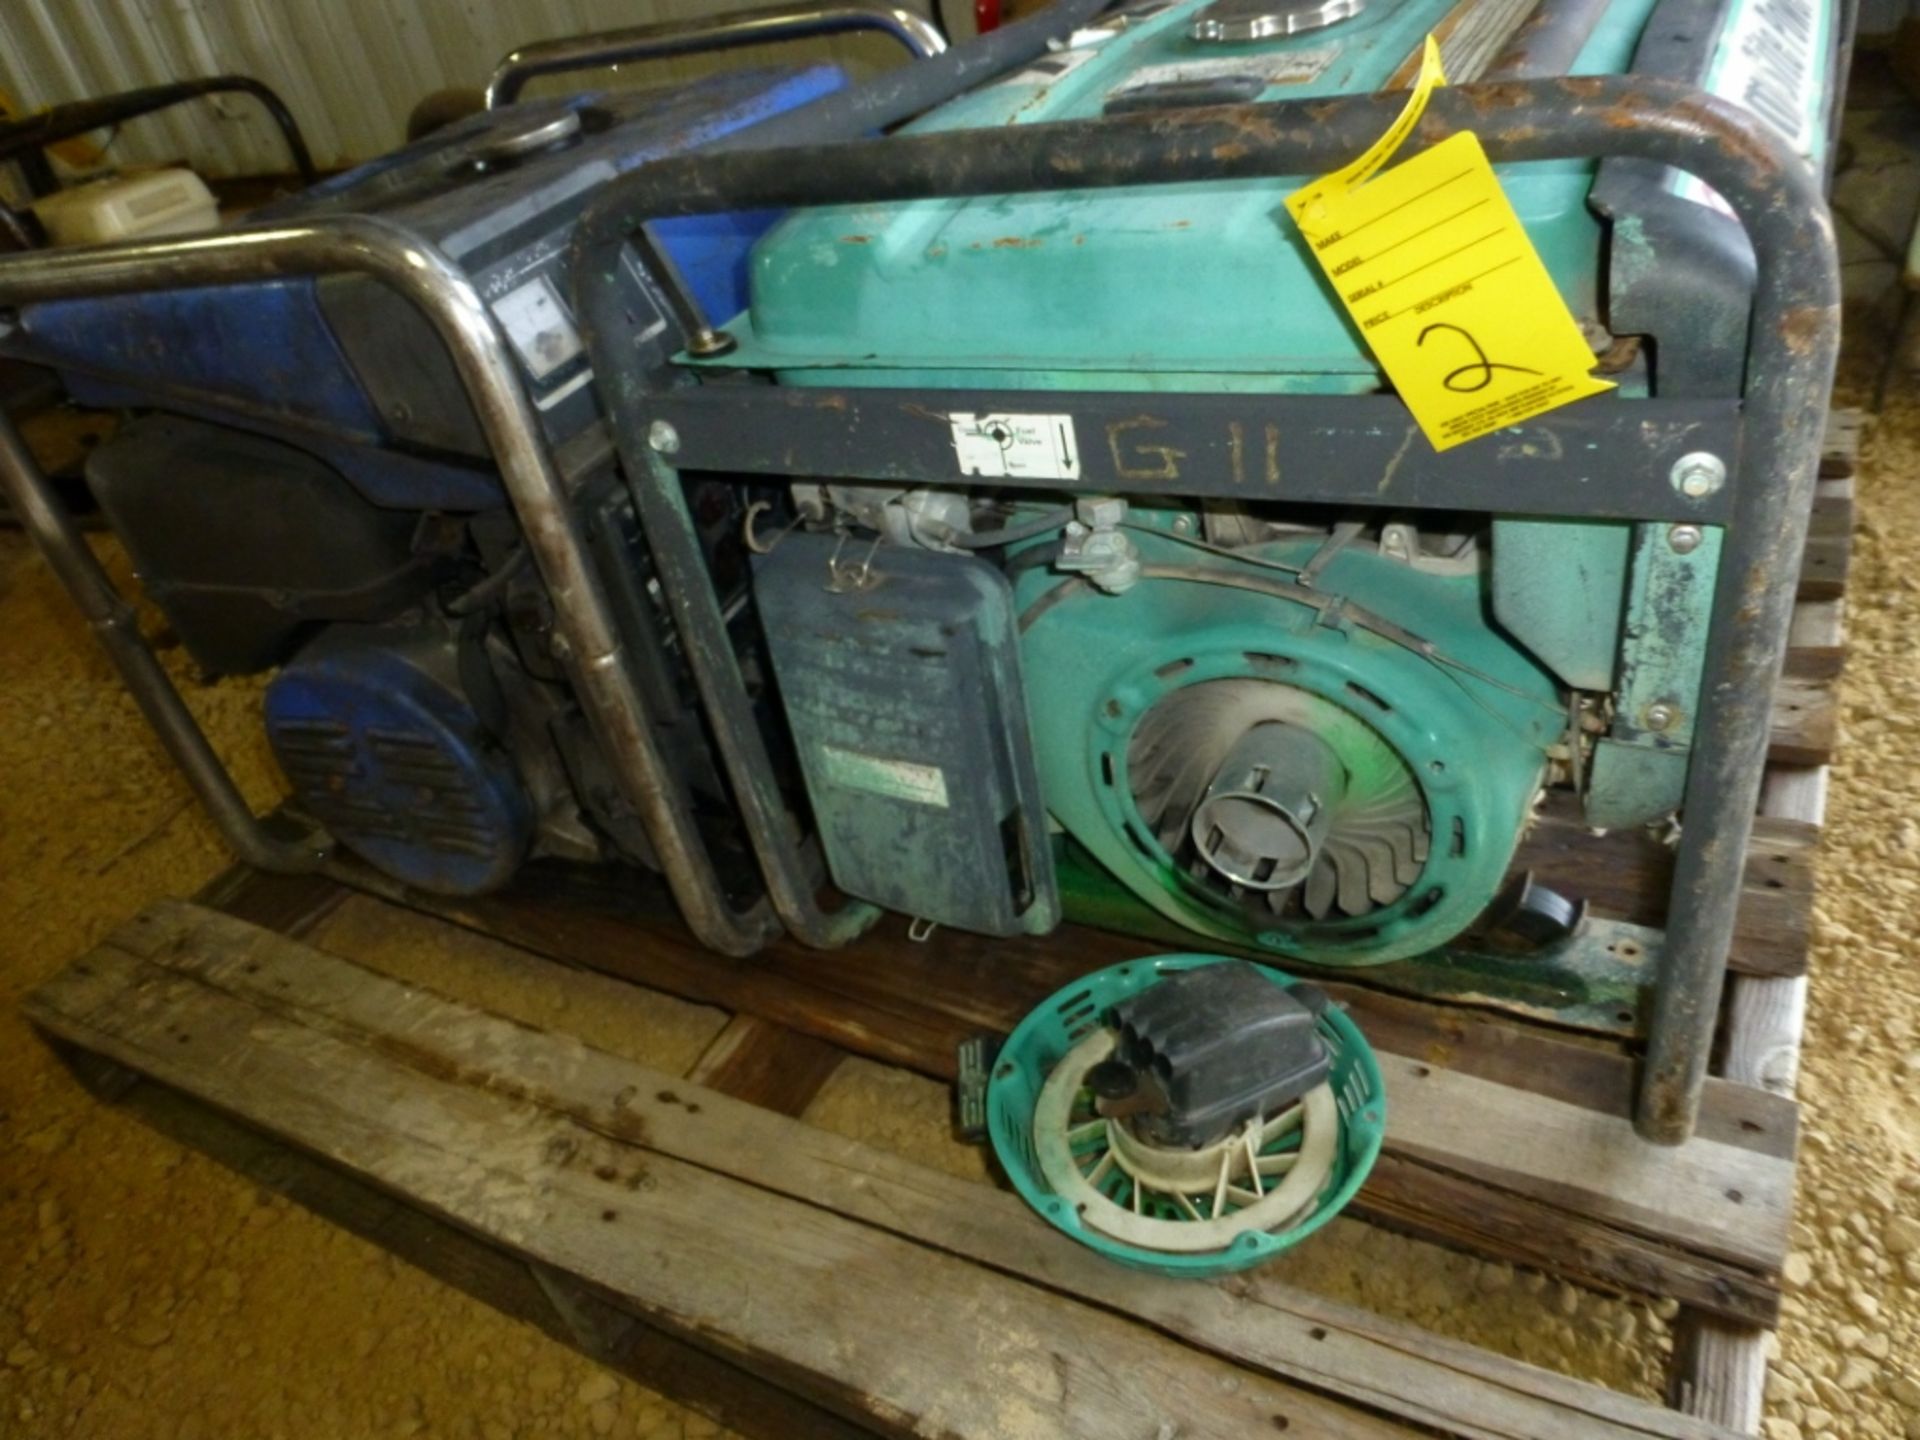 Homesite power 6500 generator, missing recoil, with blue generator, unknown working condition - Image 2 of 5